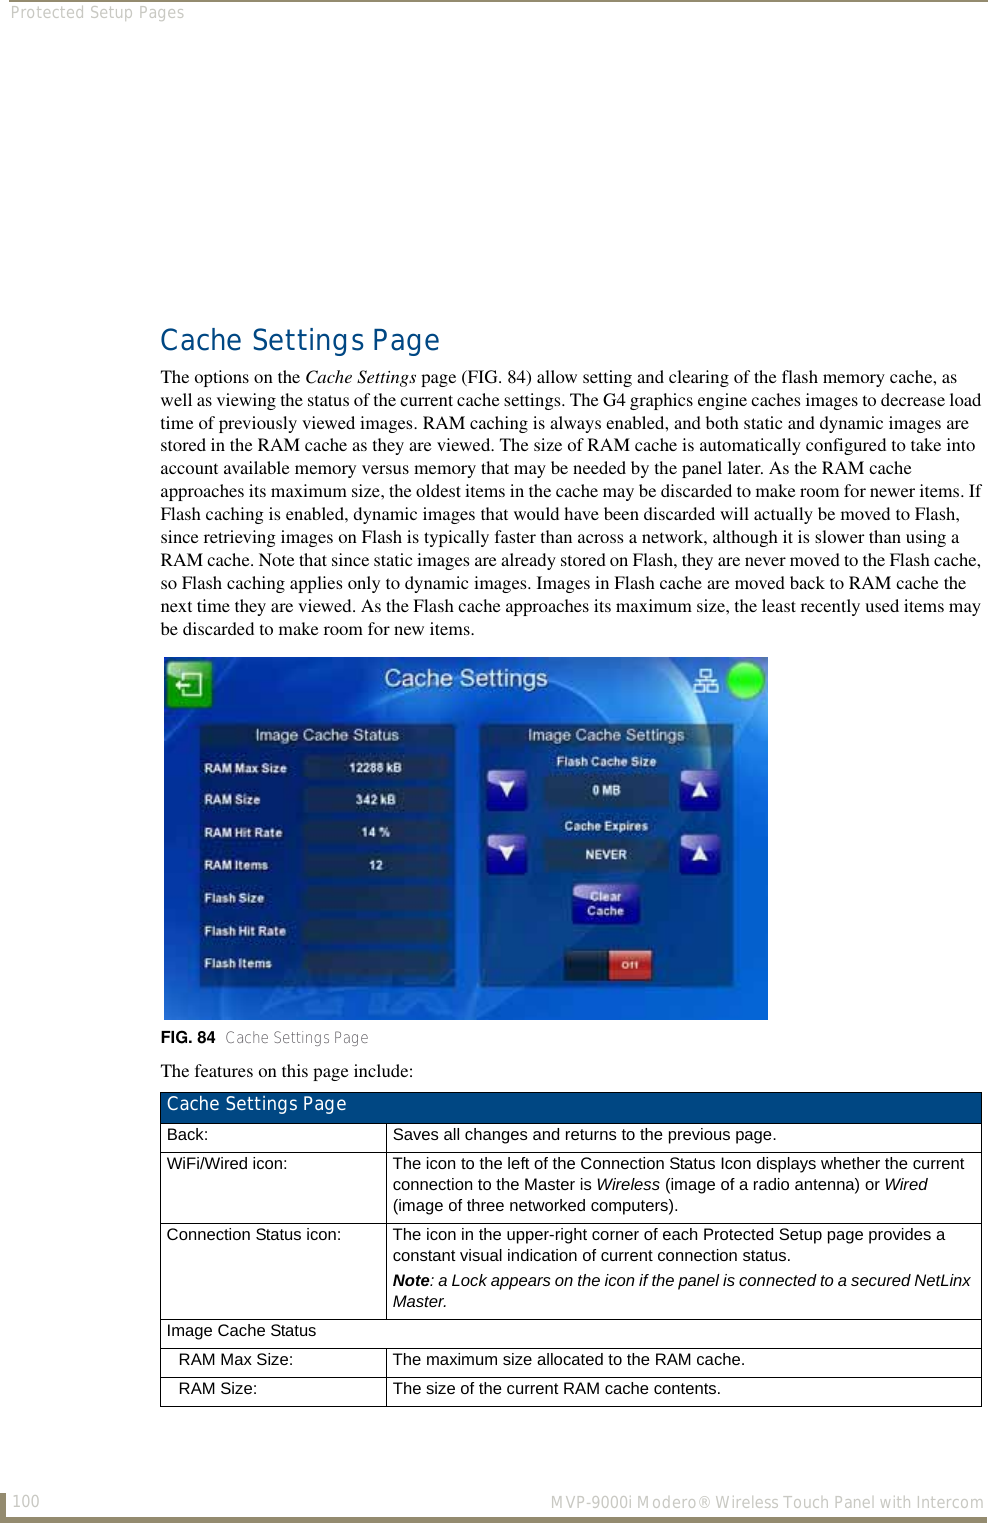 Protected Setup Pages100  MVP-9000i Modero® Wireless Touch Panel with IntercomCache Settings PageThe options on the Cache Settings page (FIG. 84) allow setting and clearing of the flash memory cache, as well as viewing the status of the current cache settings. The G4 graphics engine caches images to decrease load time of previously viewed images. RAM caching is always enabled, and both static and dynamic images are stored in the RAM cache as they are viewed. The size of RAM cache is automatically configured to take into account available memory versus memory that may be needed by the panel later. As the RAM cache approaches its maximum size, the oldest items in the cache may be discarded to make room for newer items. If Flash caching is enabled, dynamic images that would have been discarded will actually be moved to Flash, since retrieving images on Flash is typically faster than across a network, although it is slower than using a RAM cache. Note that since static images are already stored on Flash, they are never moved to the Flash cache, so Flash caching applies only to dynamic images. Images in Flash cache are moved back to RAM cache the next time they are viewed. As the Flash cache approaches its maximum size, the least recently used items may be discarded to make room for new items.  The features on this page include:FIG. 84  Cache Settings PageCache Settings Page Back: Saves all changes and returns to the previous page.WiFi/Wired icon: The icon to the left of the Connection Status Icon displays whether the current connection to the Master is Wireless (image of a radio antenna) or Wired (image of three networked computers).Connection Status icon: The icon in the upper-right corner of each Protected Setup page provides a constant visual indication of current connection status.Note: a Lock appears on the icon if the panel is connected to a secured NetLinx Master.Image Cache StatusRAM Max Size: The maximum size allocated to the RAM cache.RAM Size: The size of the current RAM cache contents.